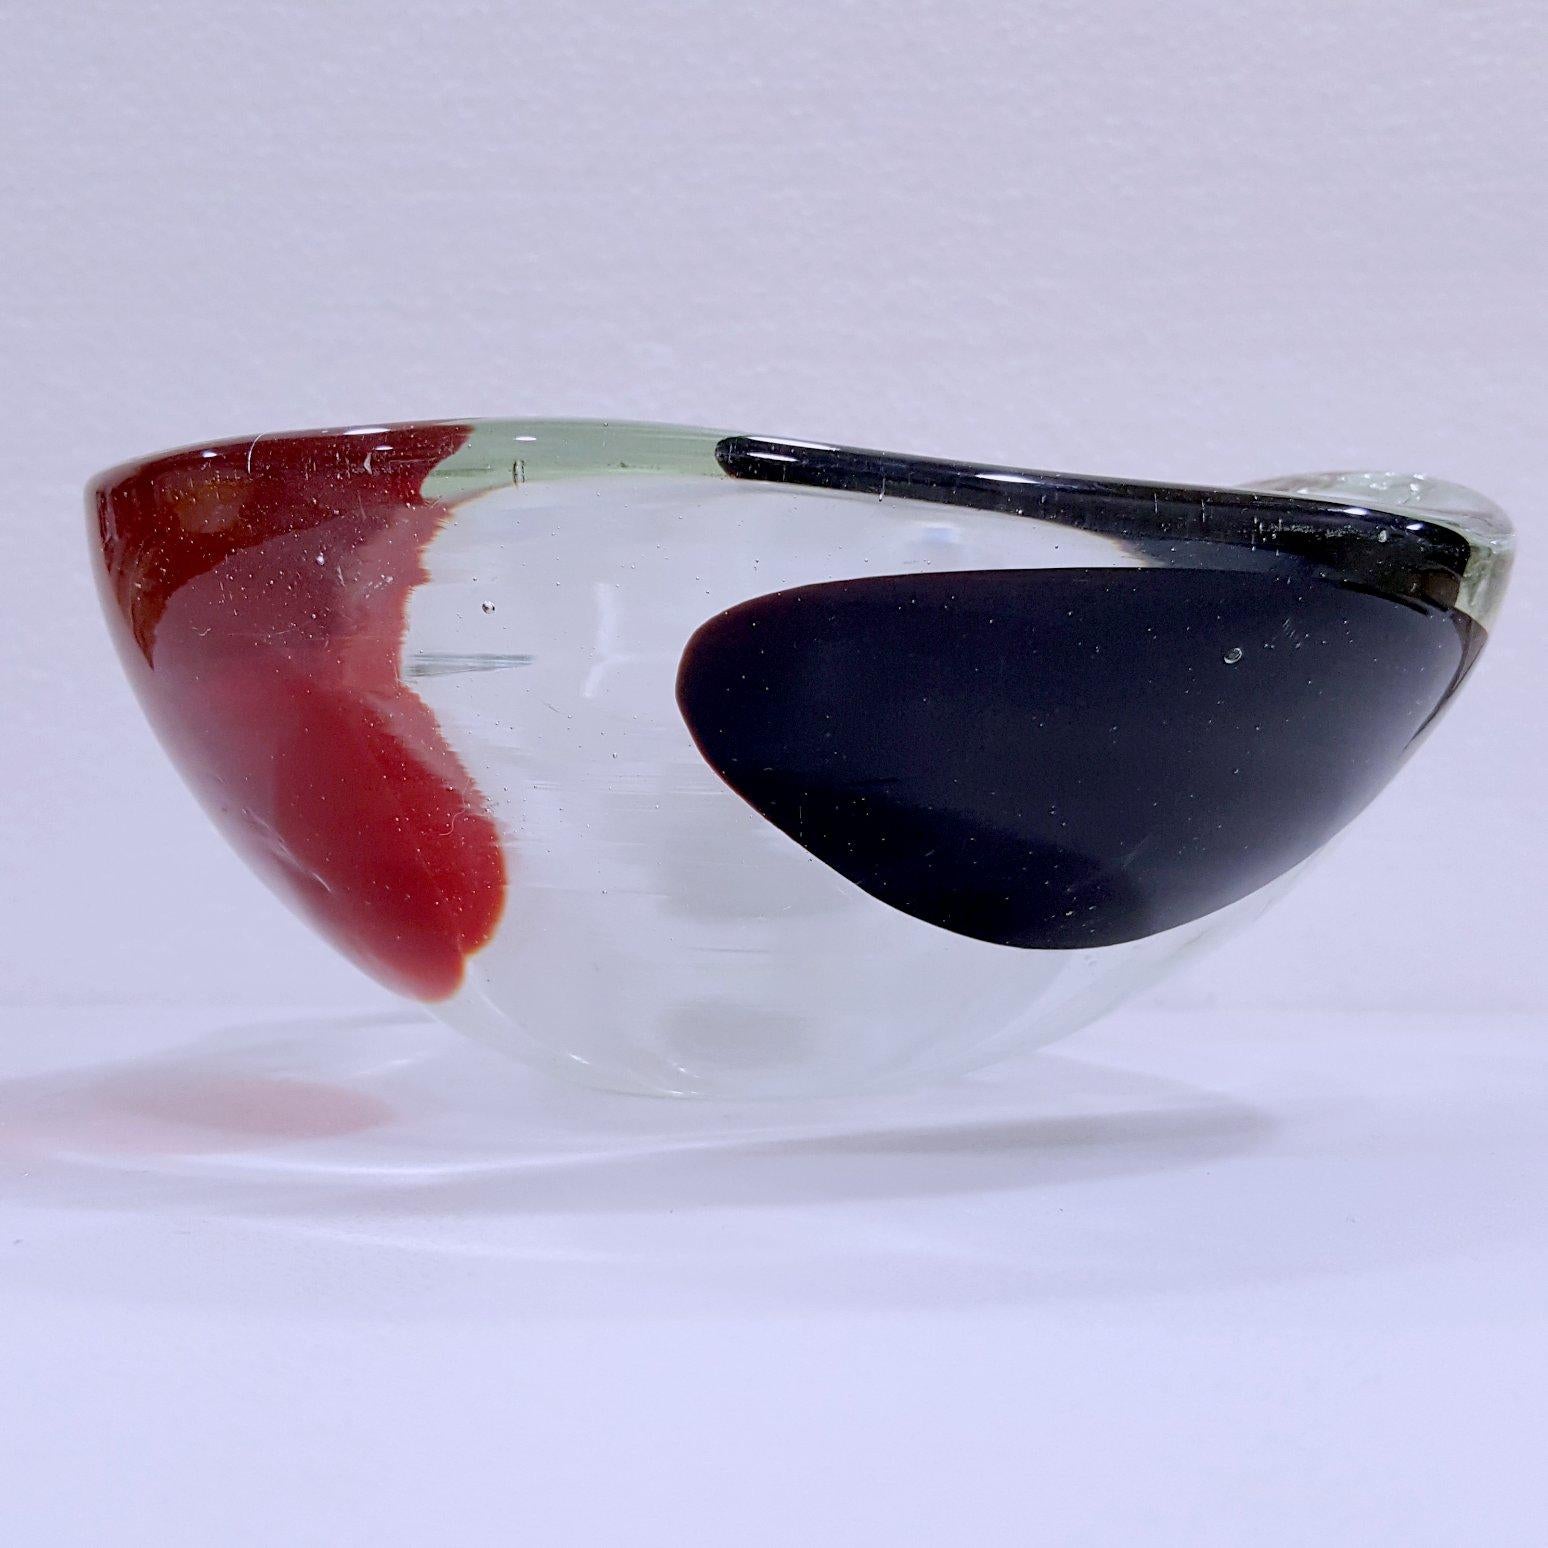 Vintage Murano Glass A Macchia Bowl (Fratelli Toso suspected) 
(See also our companion listing to this item -- a large centerpiece tray.)

This is a larger, heavier clear glass with three large color spots (black, white, and red). There are numerous